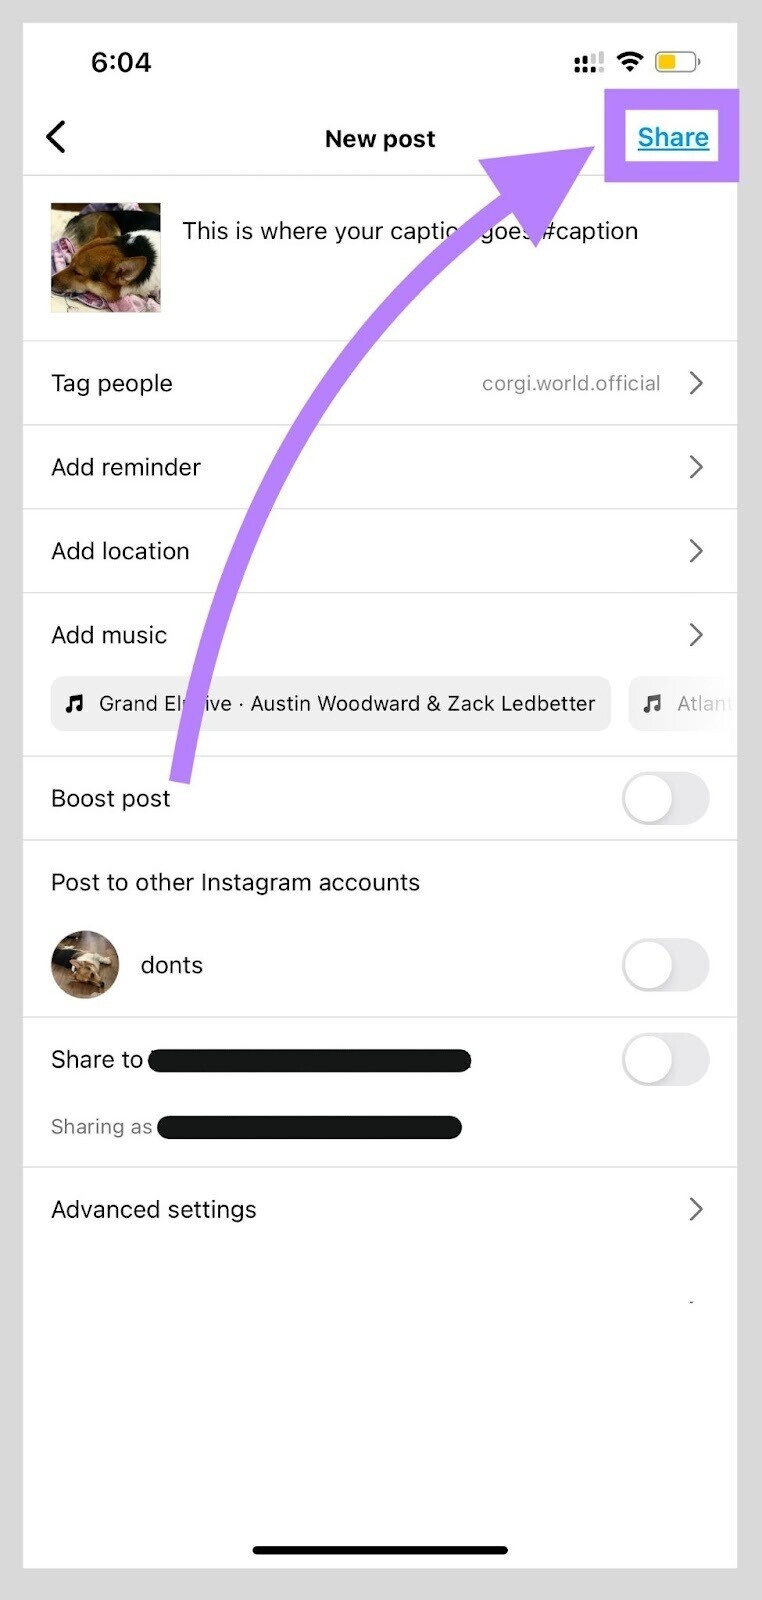 “Share” button lets users publish an Instagram post immediately